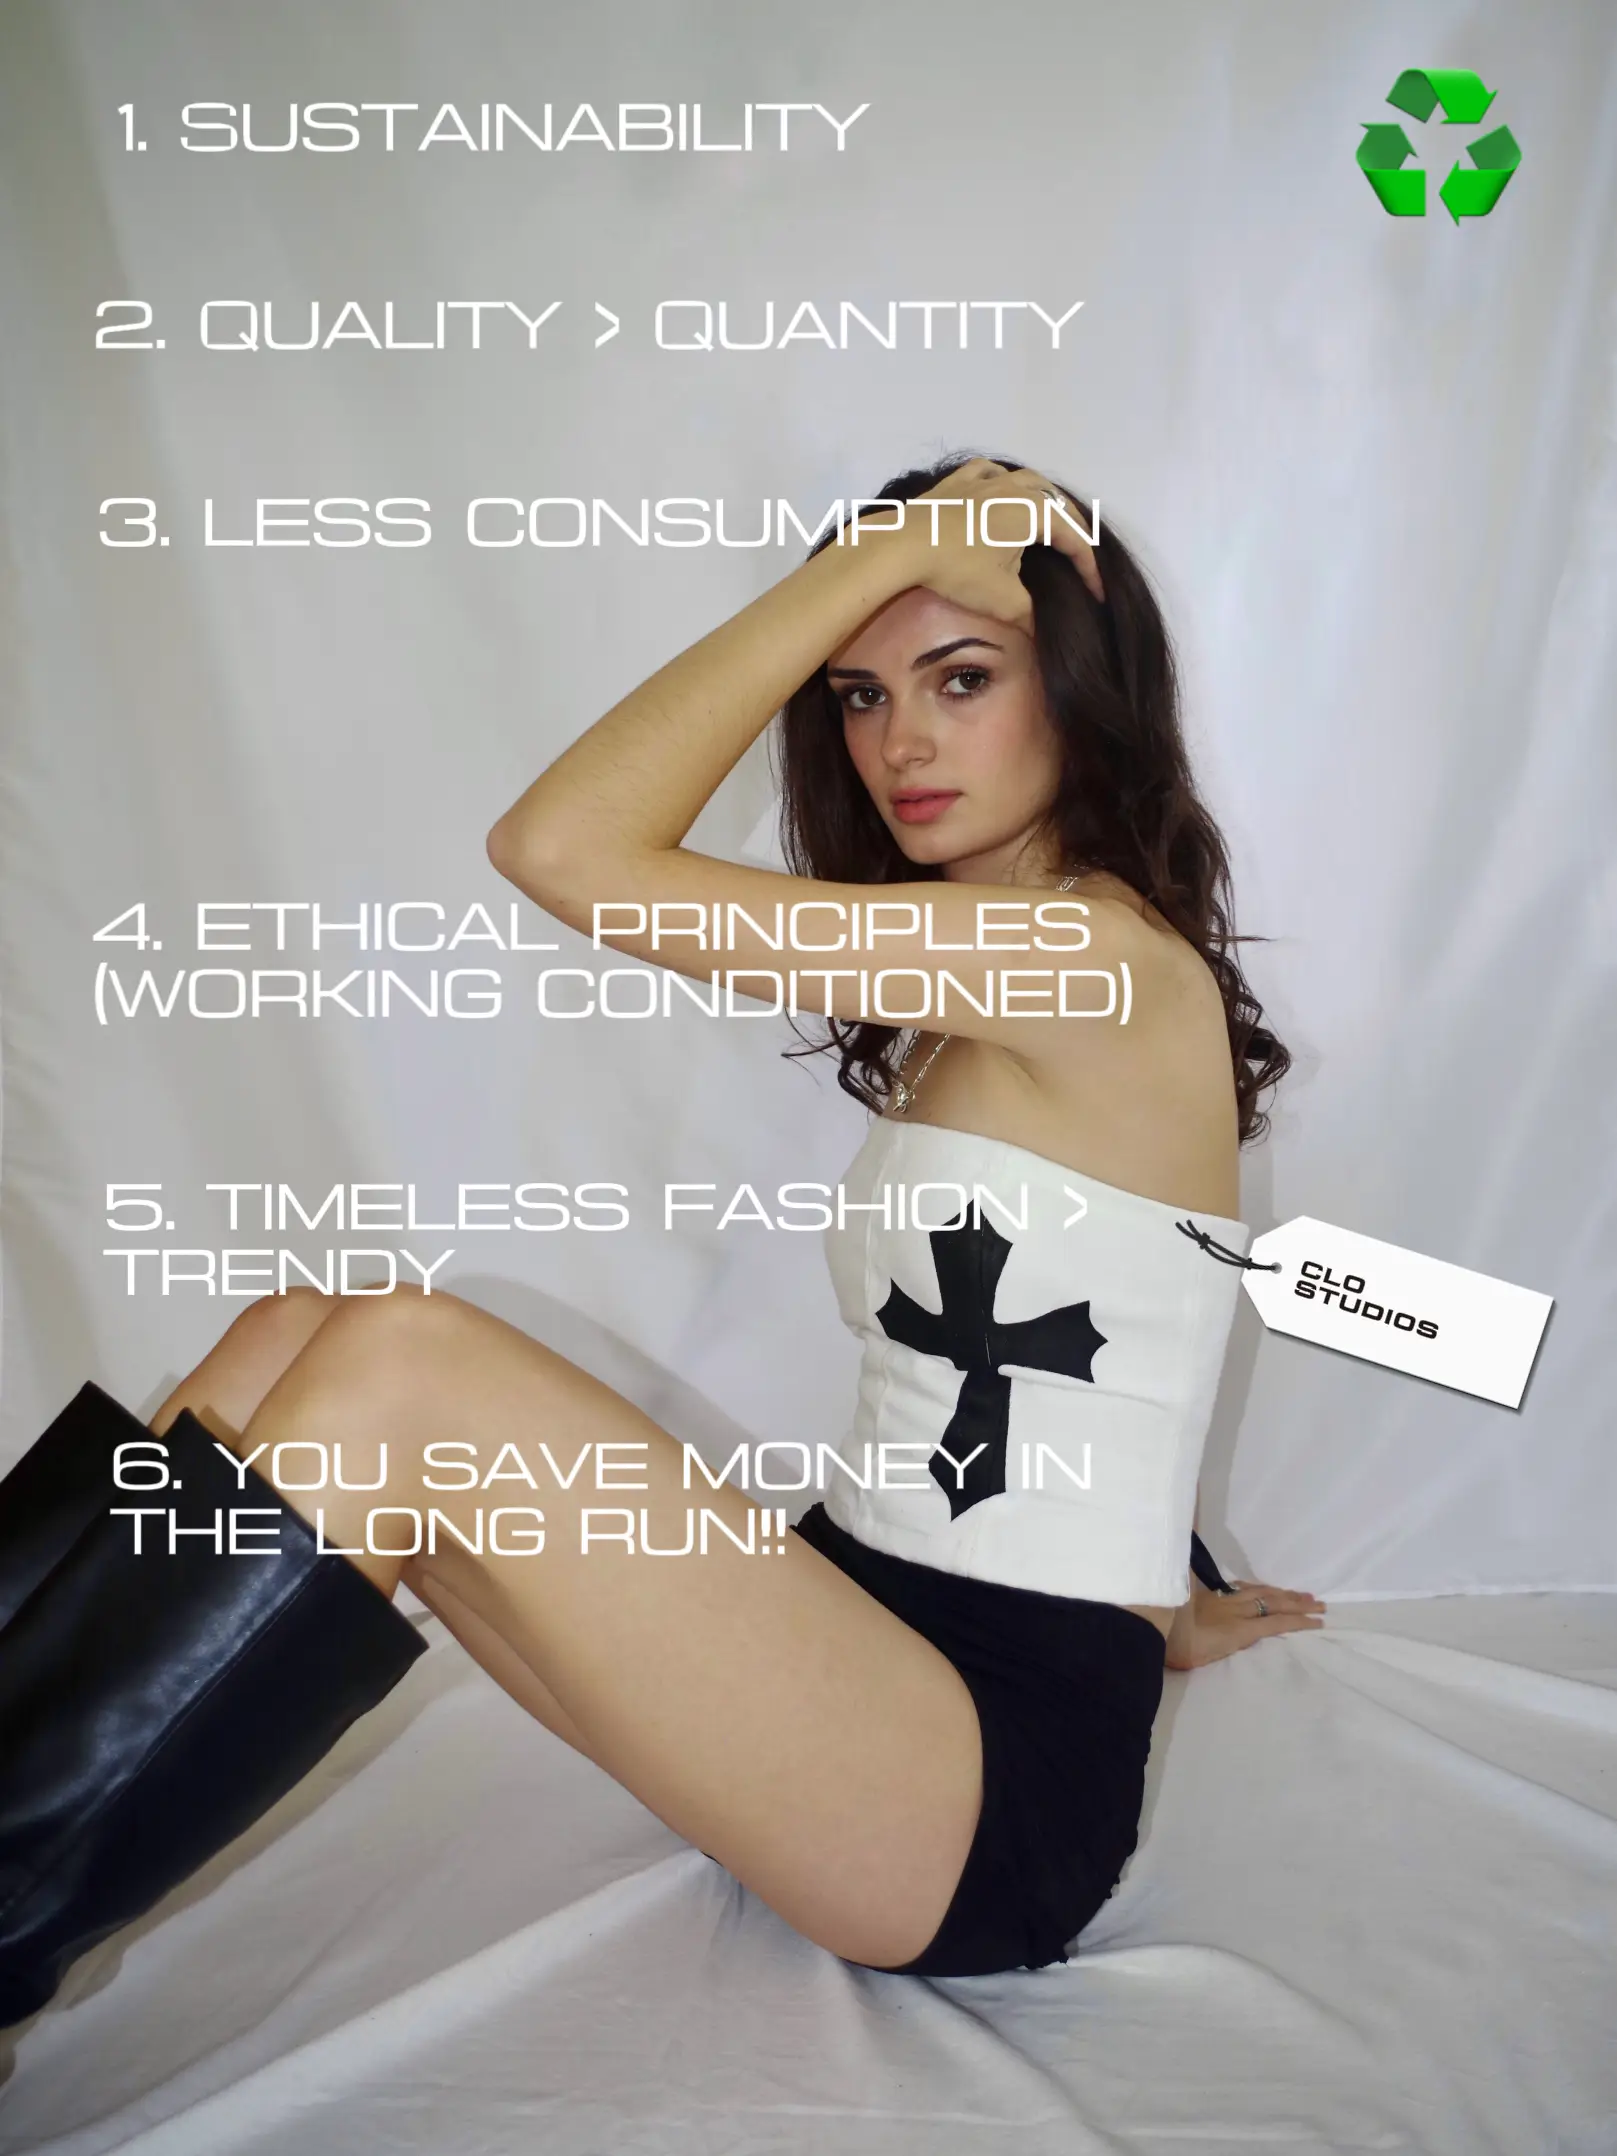 How Ethical/Sustainable Is SHEIN? – ETHICAL UNICORN